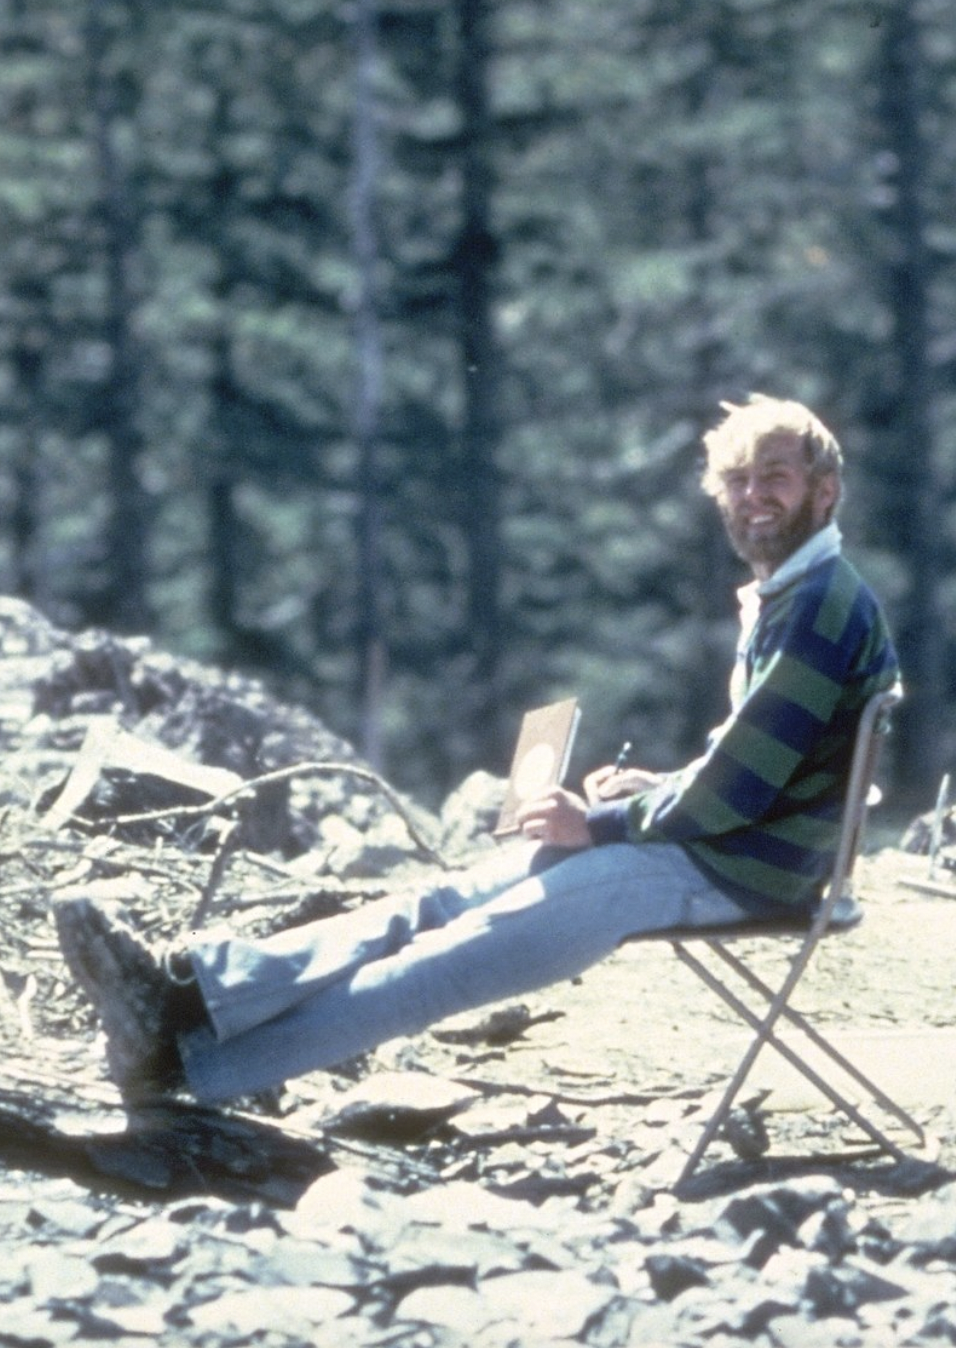 There is a photo of an American volcanologist sitting down while studying volcanic activity at Mount St. Helens. 13 hours after the photograph was taken, on May 18, 1980, the volcano erupted and killed 57 people including the volcanologist.